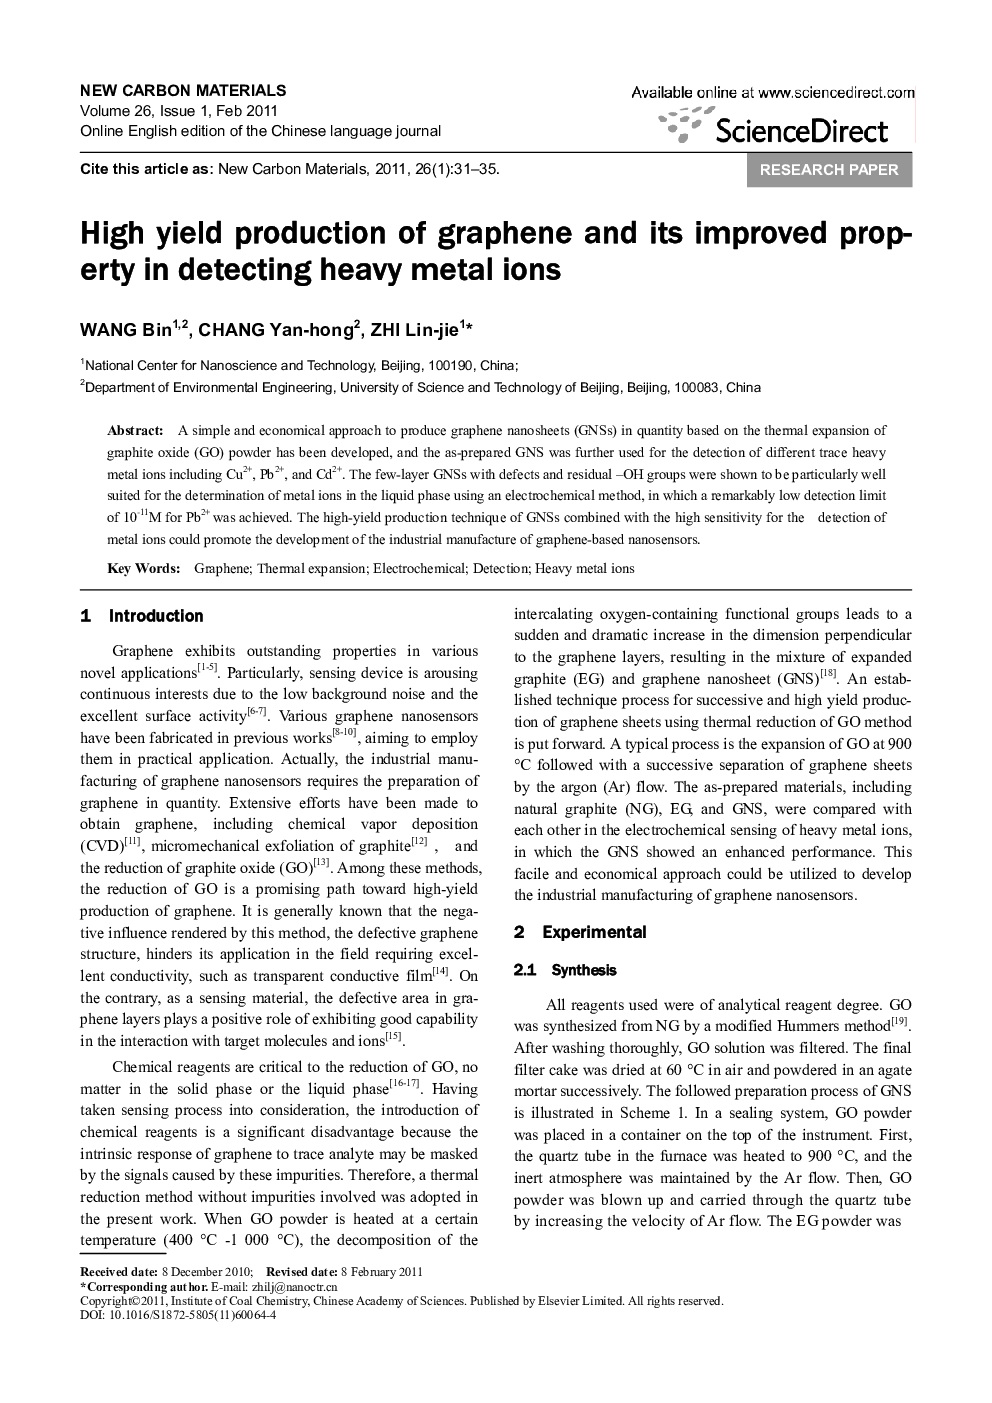 High yield production of graphene and its improved property in detecting heavy metal ions